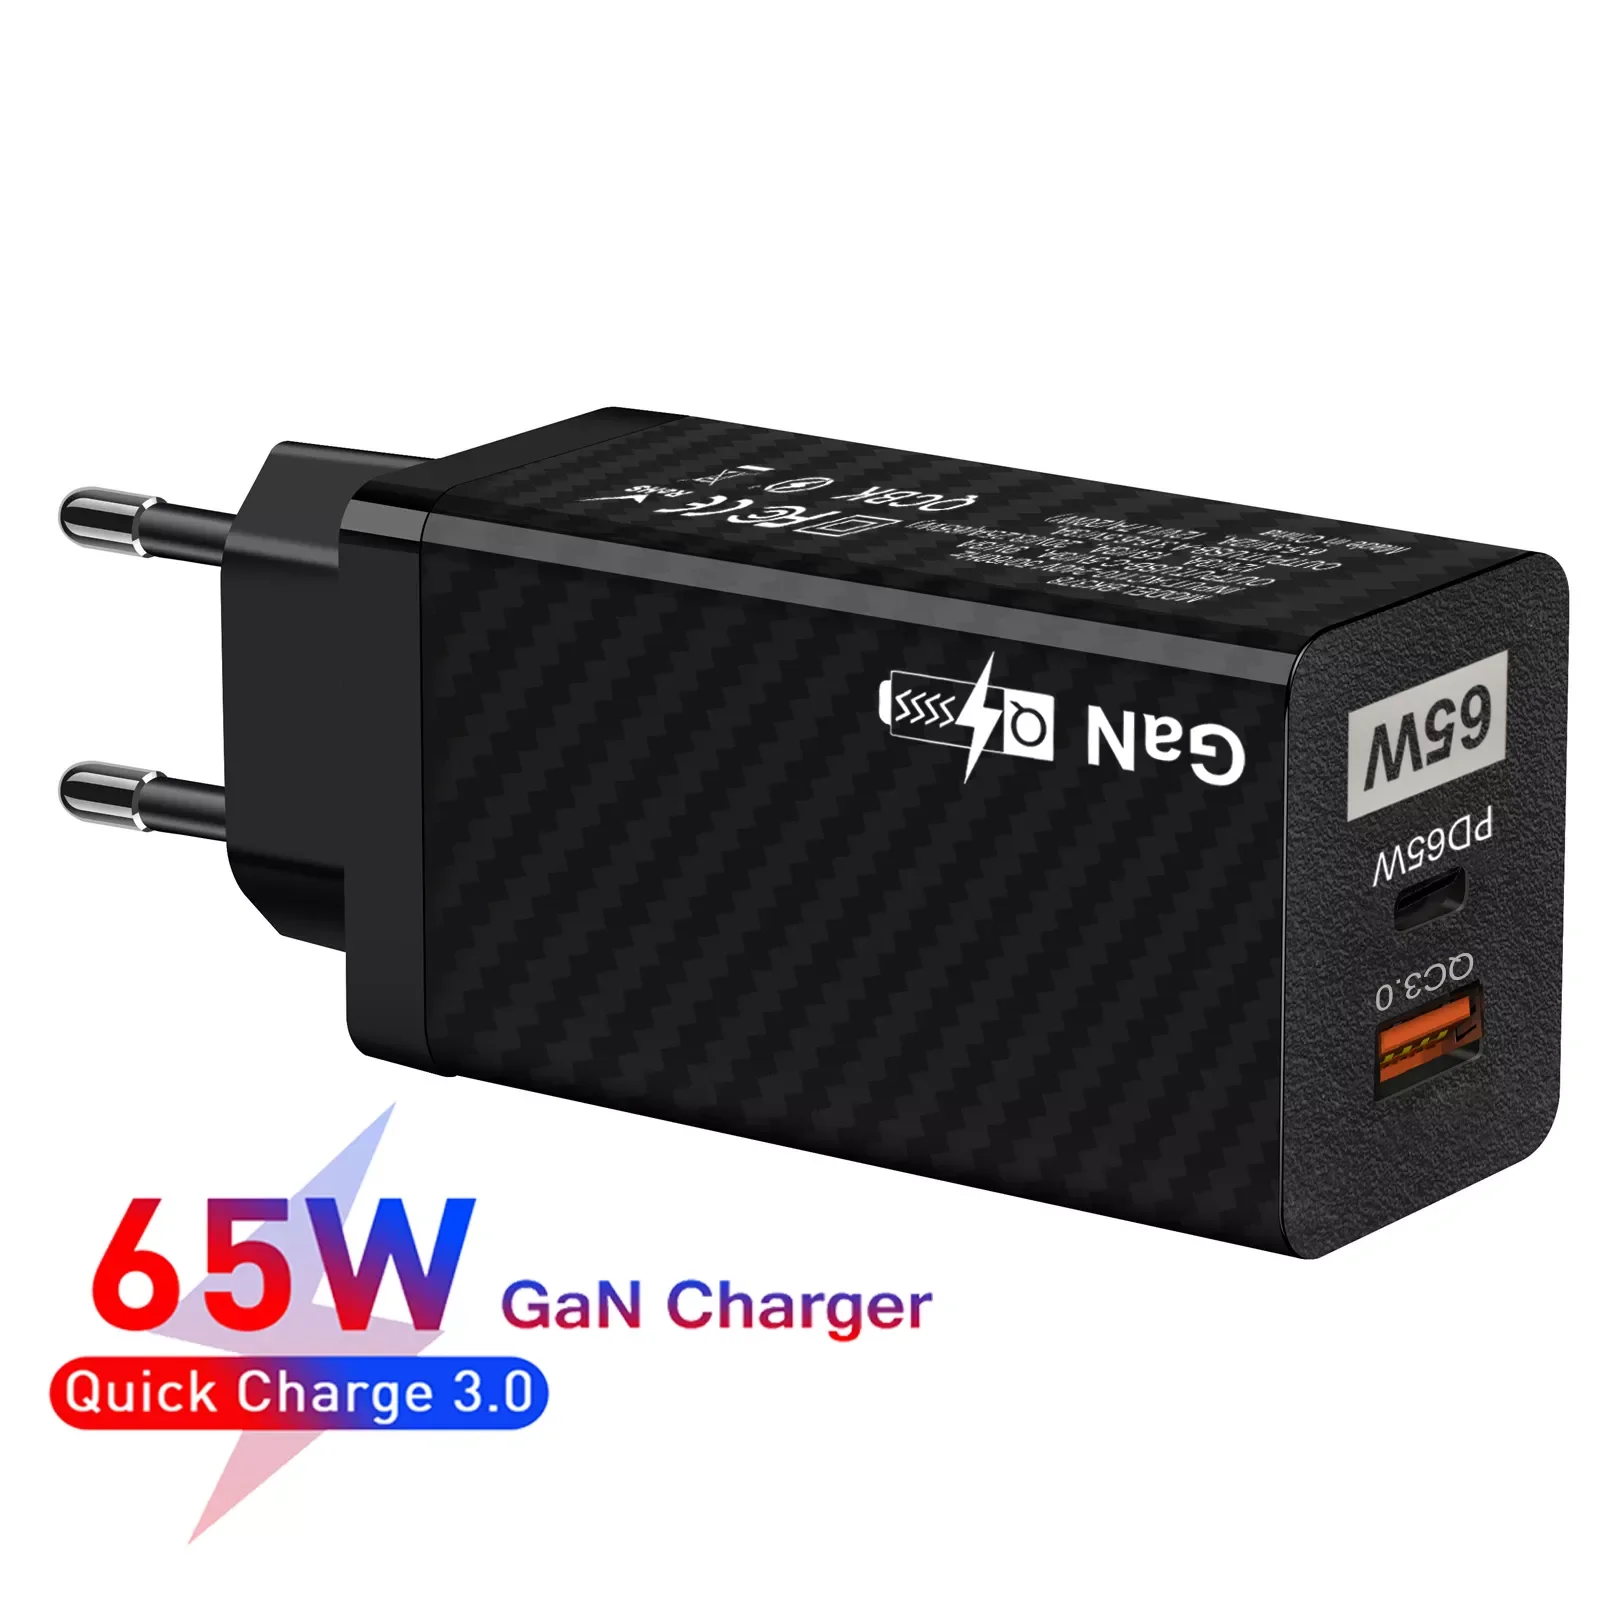 

65W GaN Charger for iPad Macbook Laptops USB Type C Super Fast Charge QC PD 3.0 Charger For iPhone 13 12 Pro Max Xiaomi Mi 11